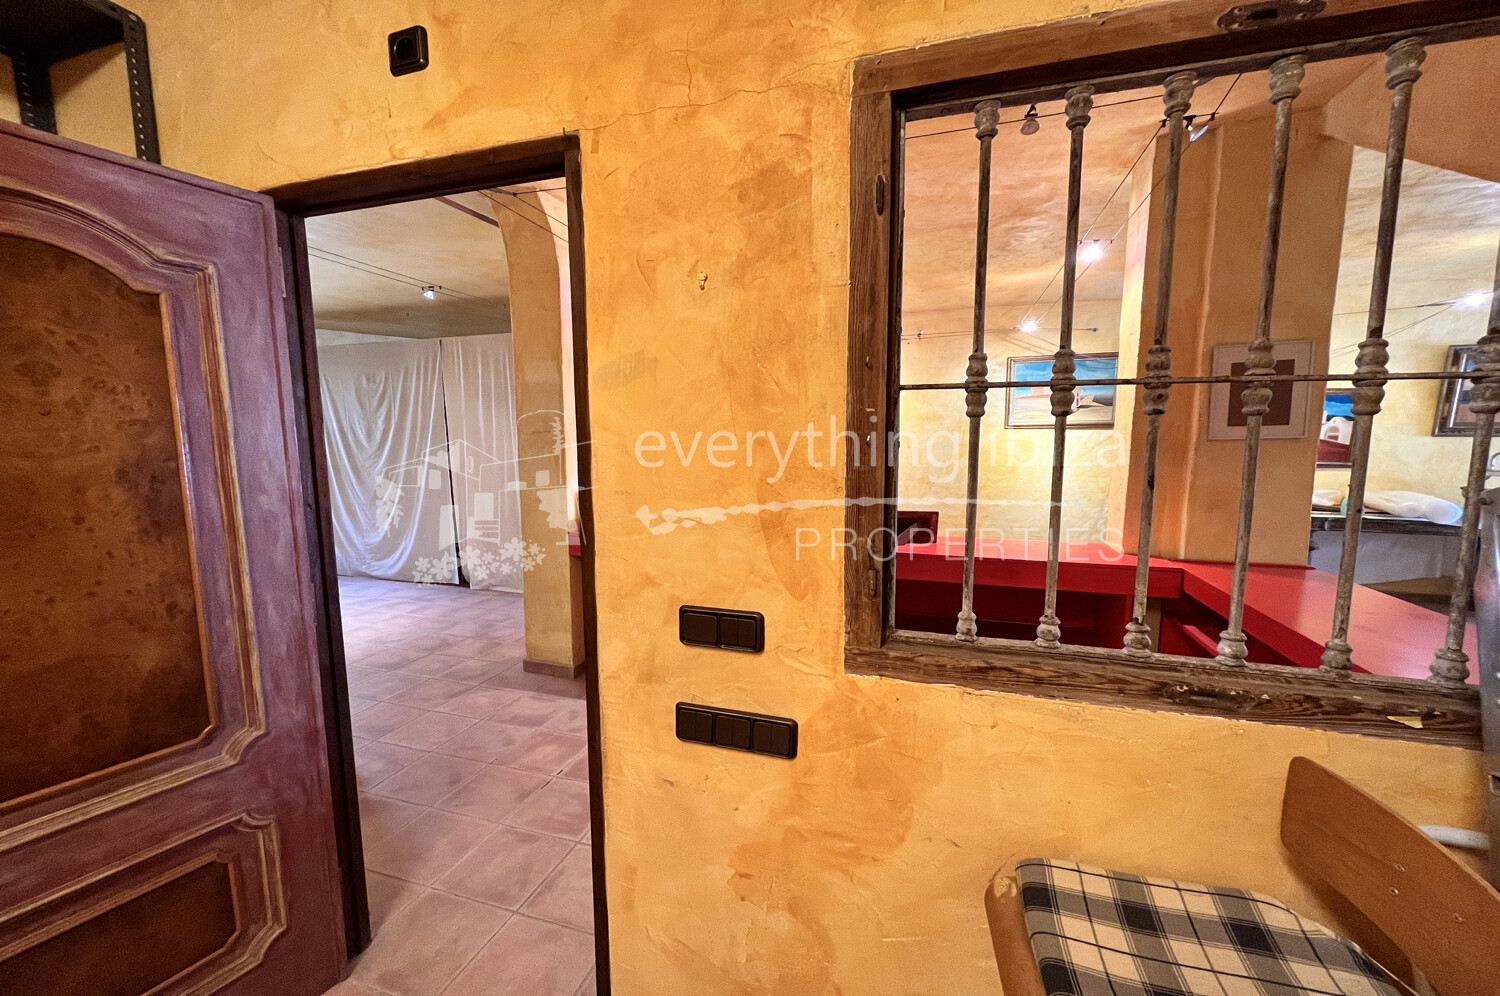 https://www.everythingibiza.com/properties/versatile-commer…of-san-jose-1640/,ref. 12, for sale in Ibiza by everything ibiza Properties